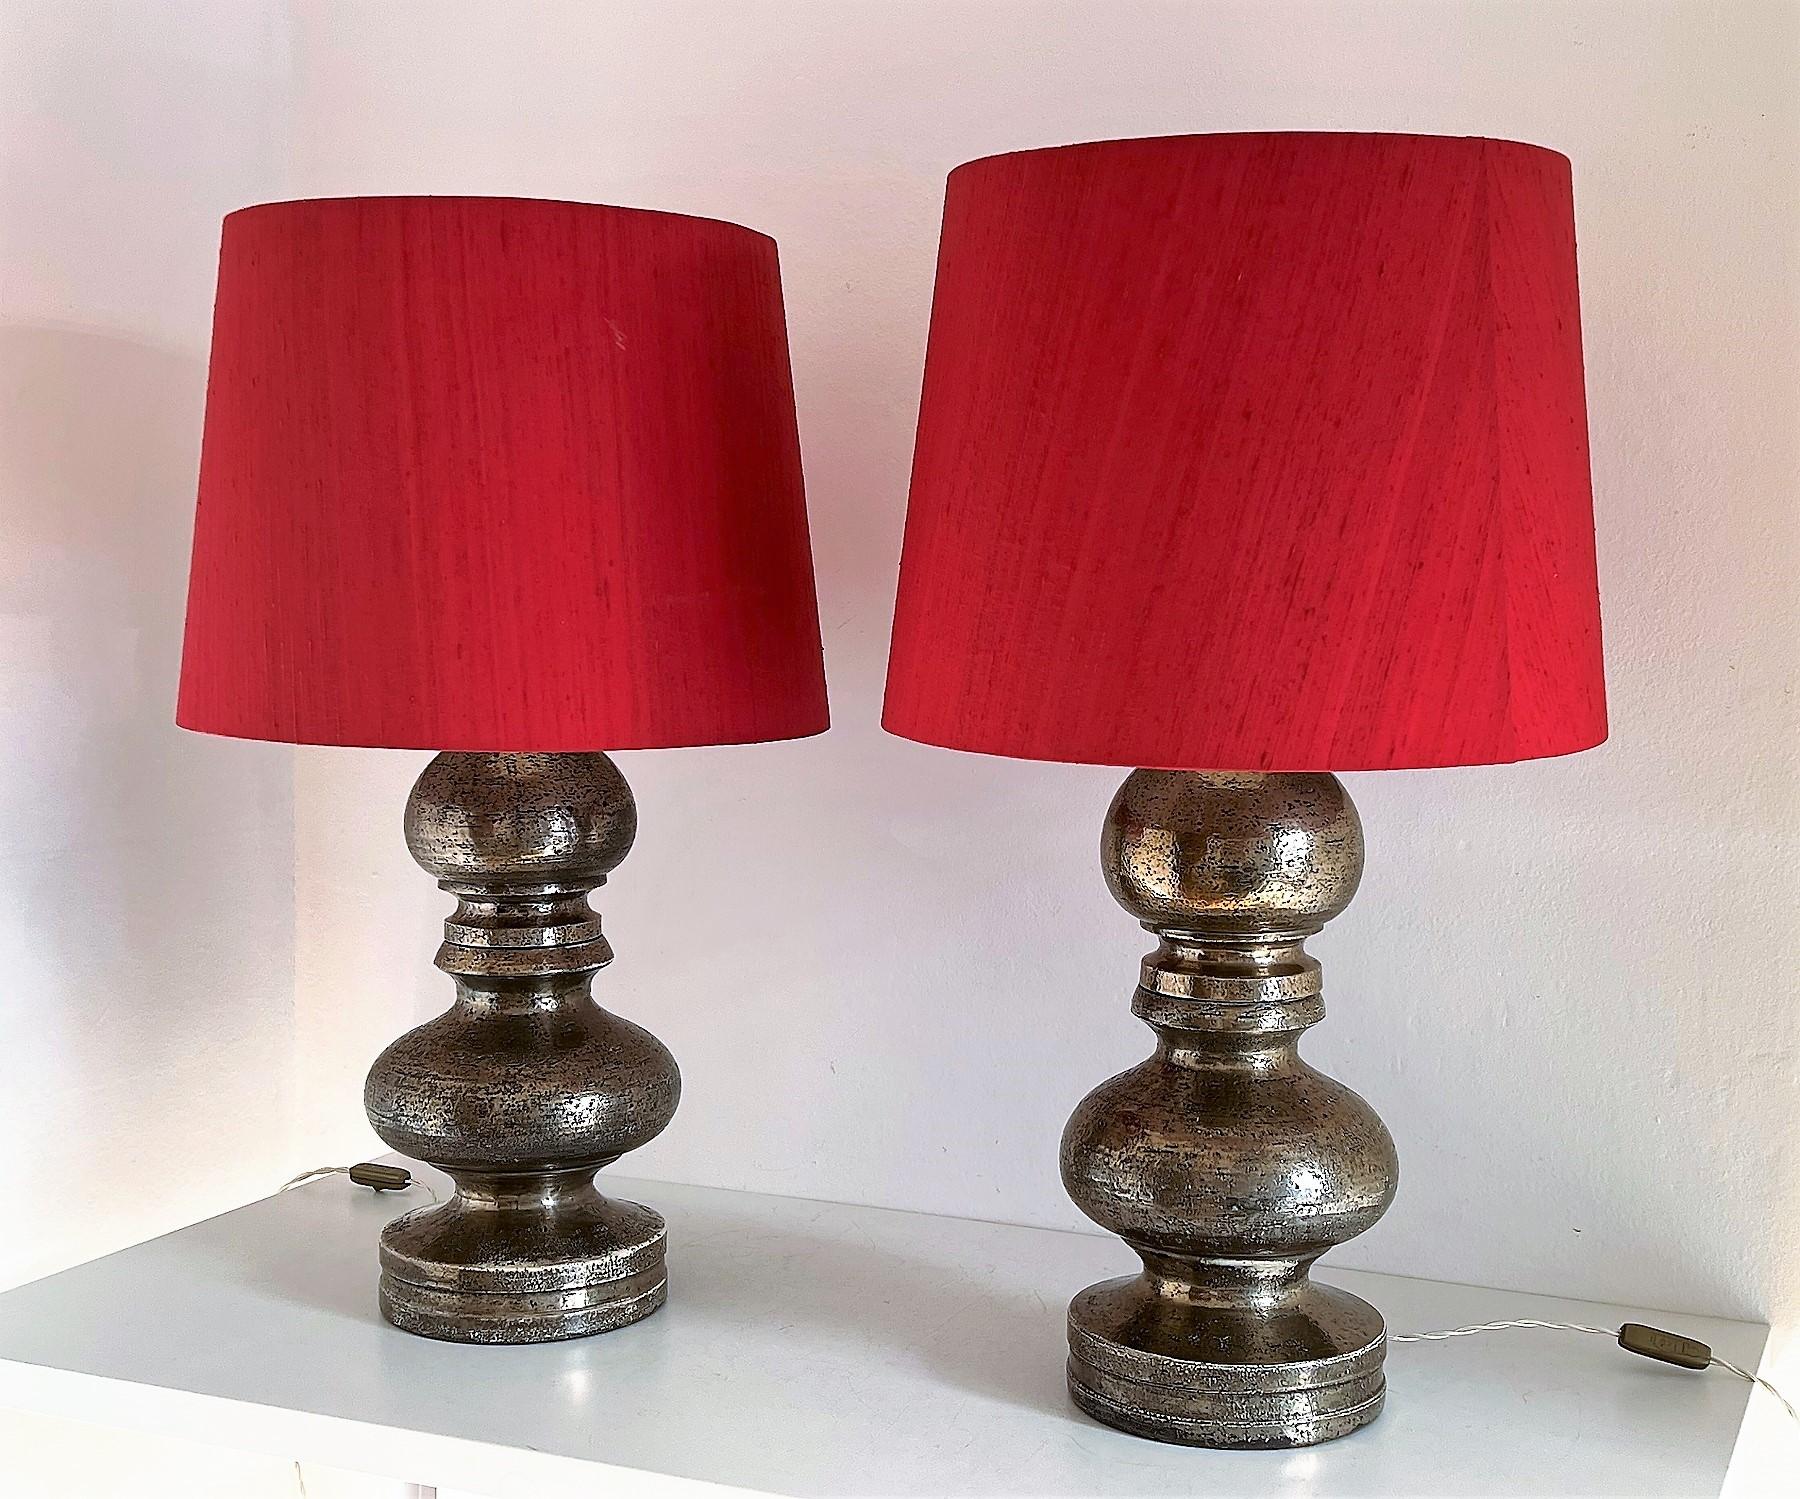 Italian Mid-Century Large Pottery Table Lamps by Aldo Londi for Bitossi, 1960s For Sale 5